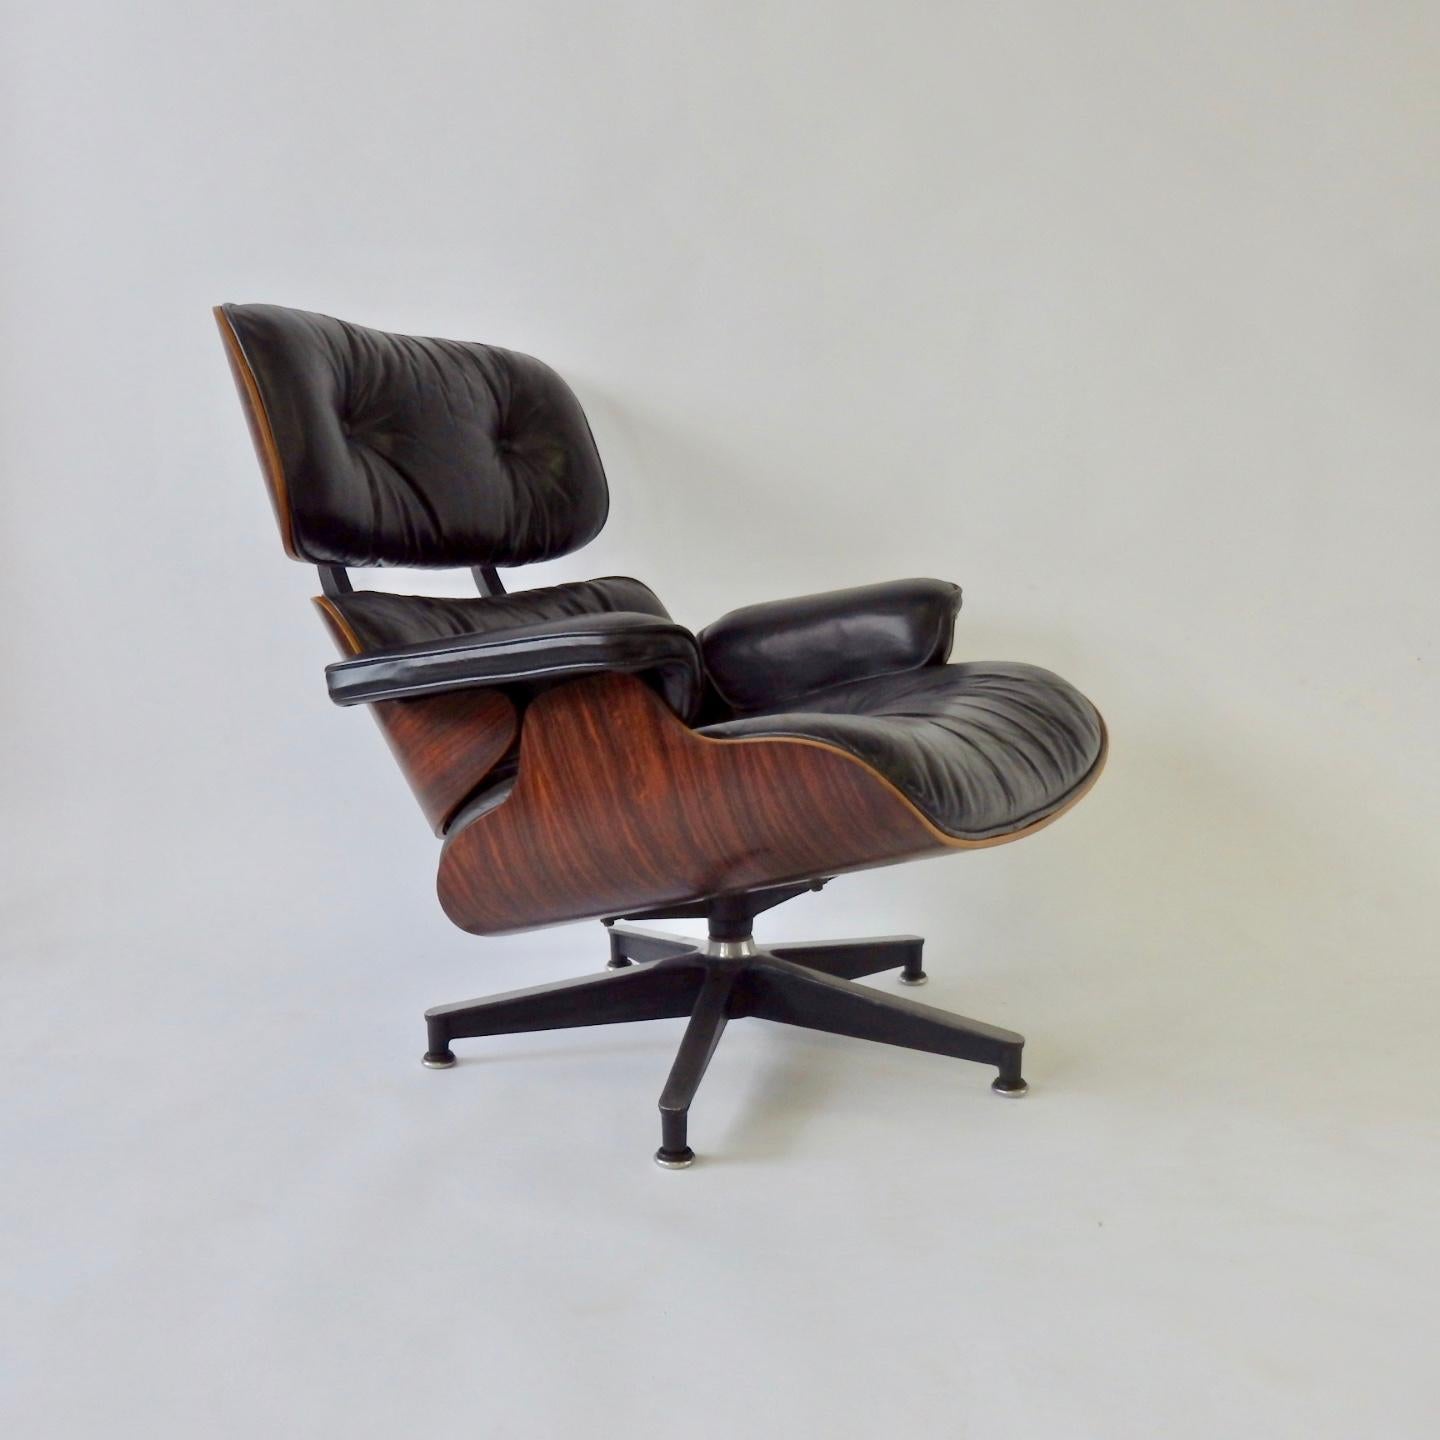 American One Owner Estate Charles and Ray Eames Black Leather Lounge Chair with Ottoman